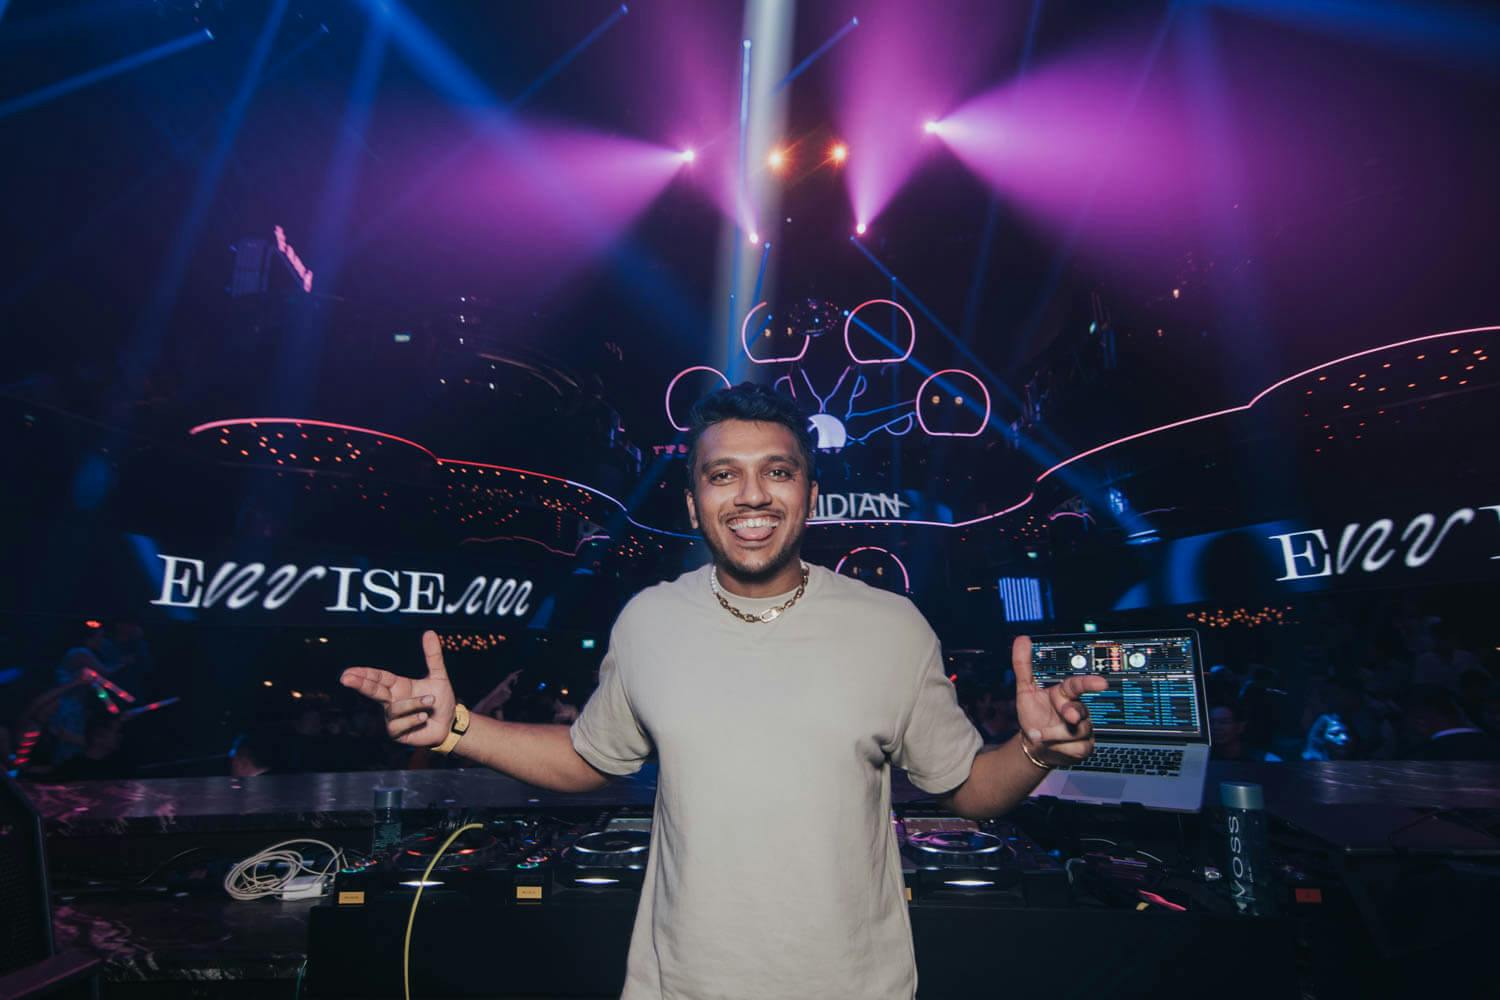 The Enviseam Party at Marquee Night Club Singapore as part of Singapore Art Week 2023